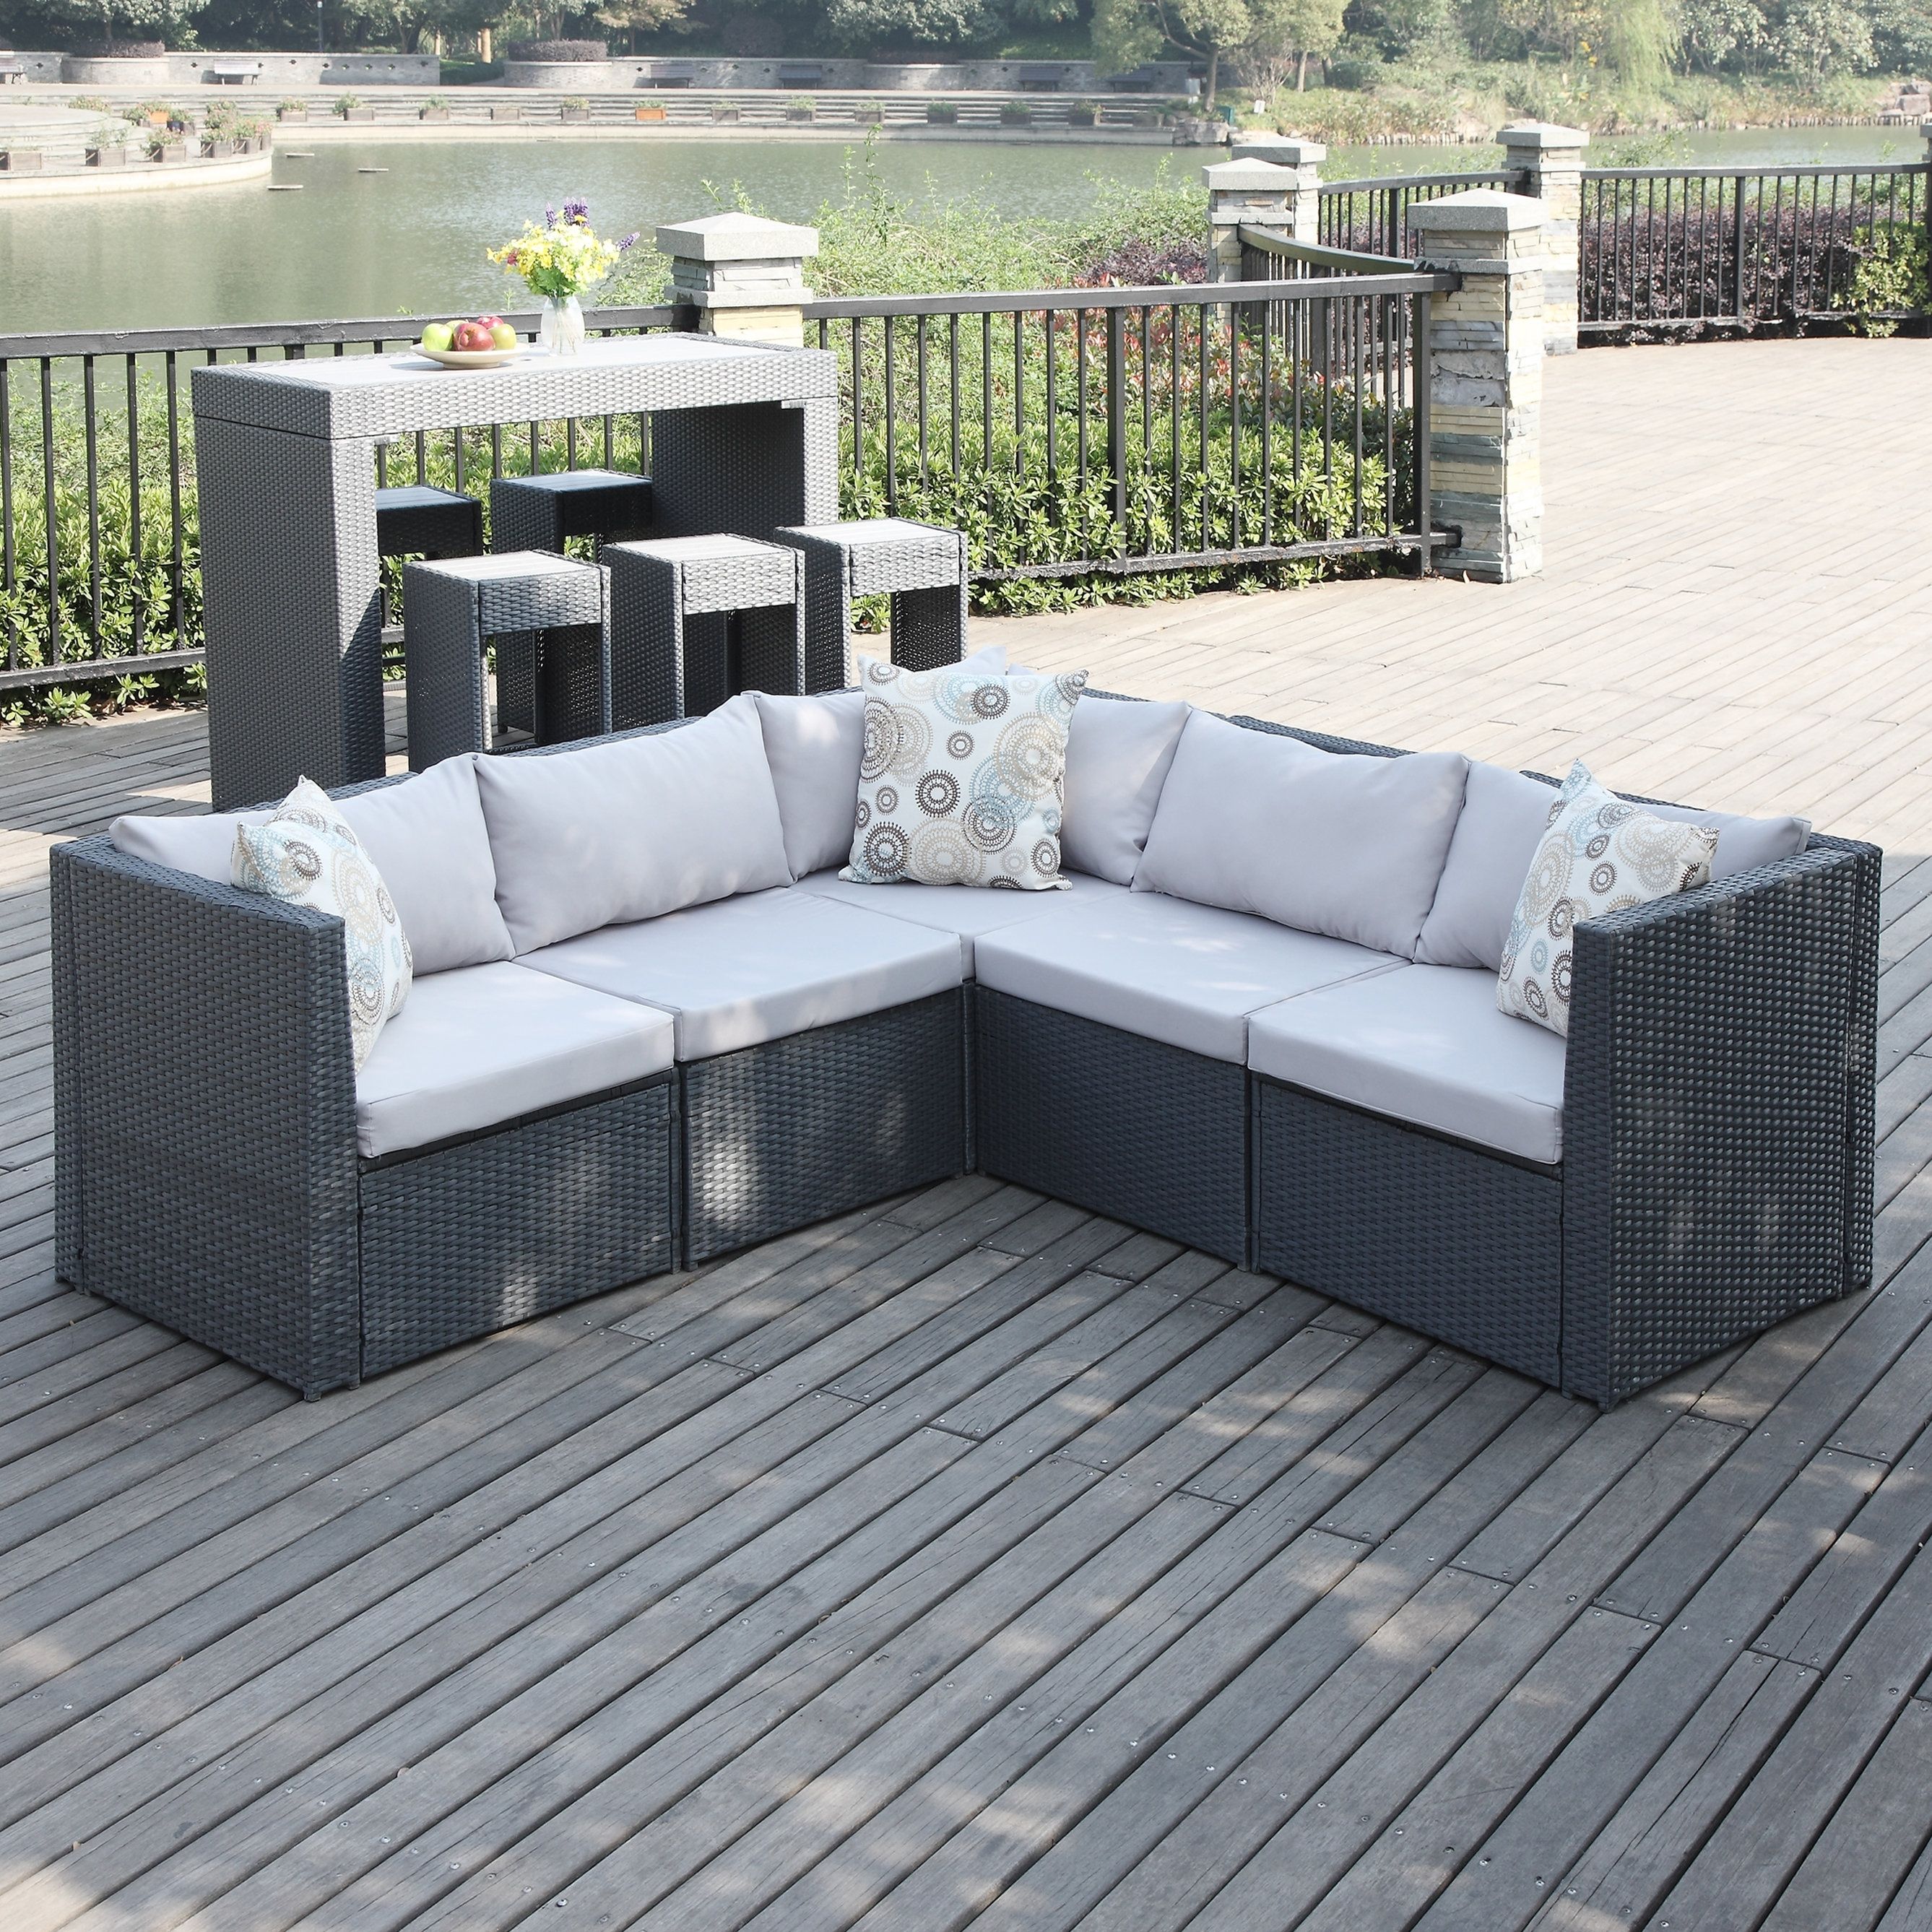 Wicker Patio Furniture You'll Love | Wayfair Within Patio Sofas (View 5 of 10)